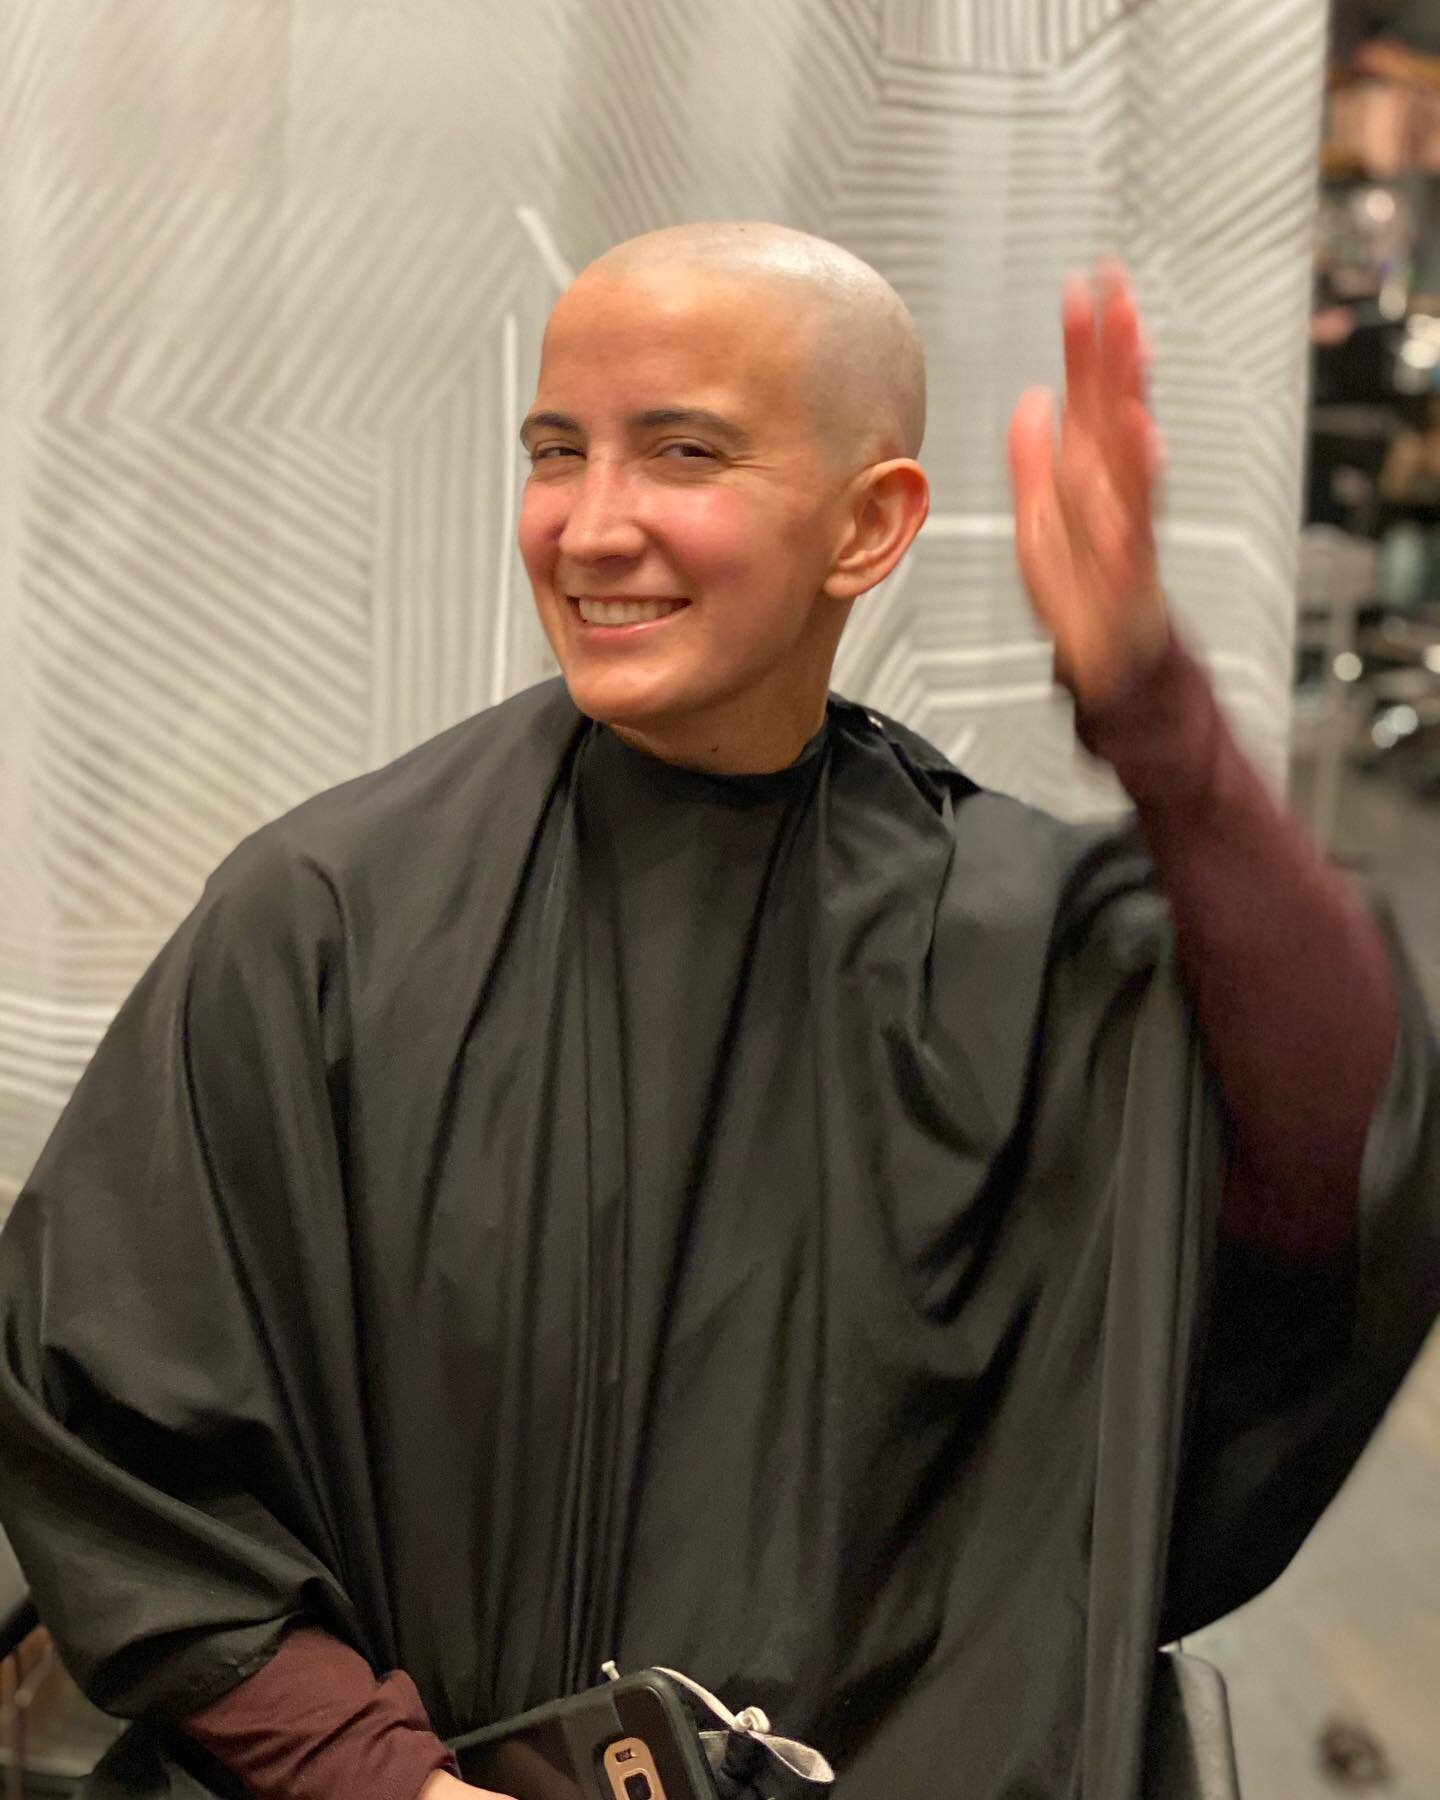 The bold and the beautiful! 😍
🐌
🐌
🐌
‼️please be aware that we ✨BOTH WERE WEARING MASKS ✨ through this whole appointment!! Her mask was only removed at the end of her appointment since this was her first time with a completely shaved head! And I f